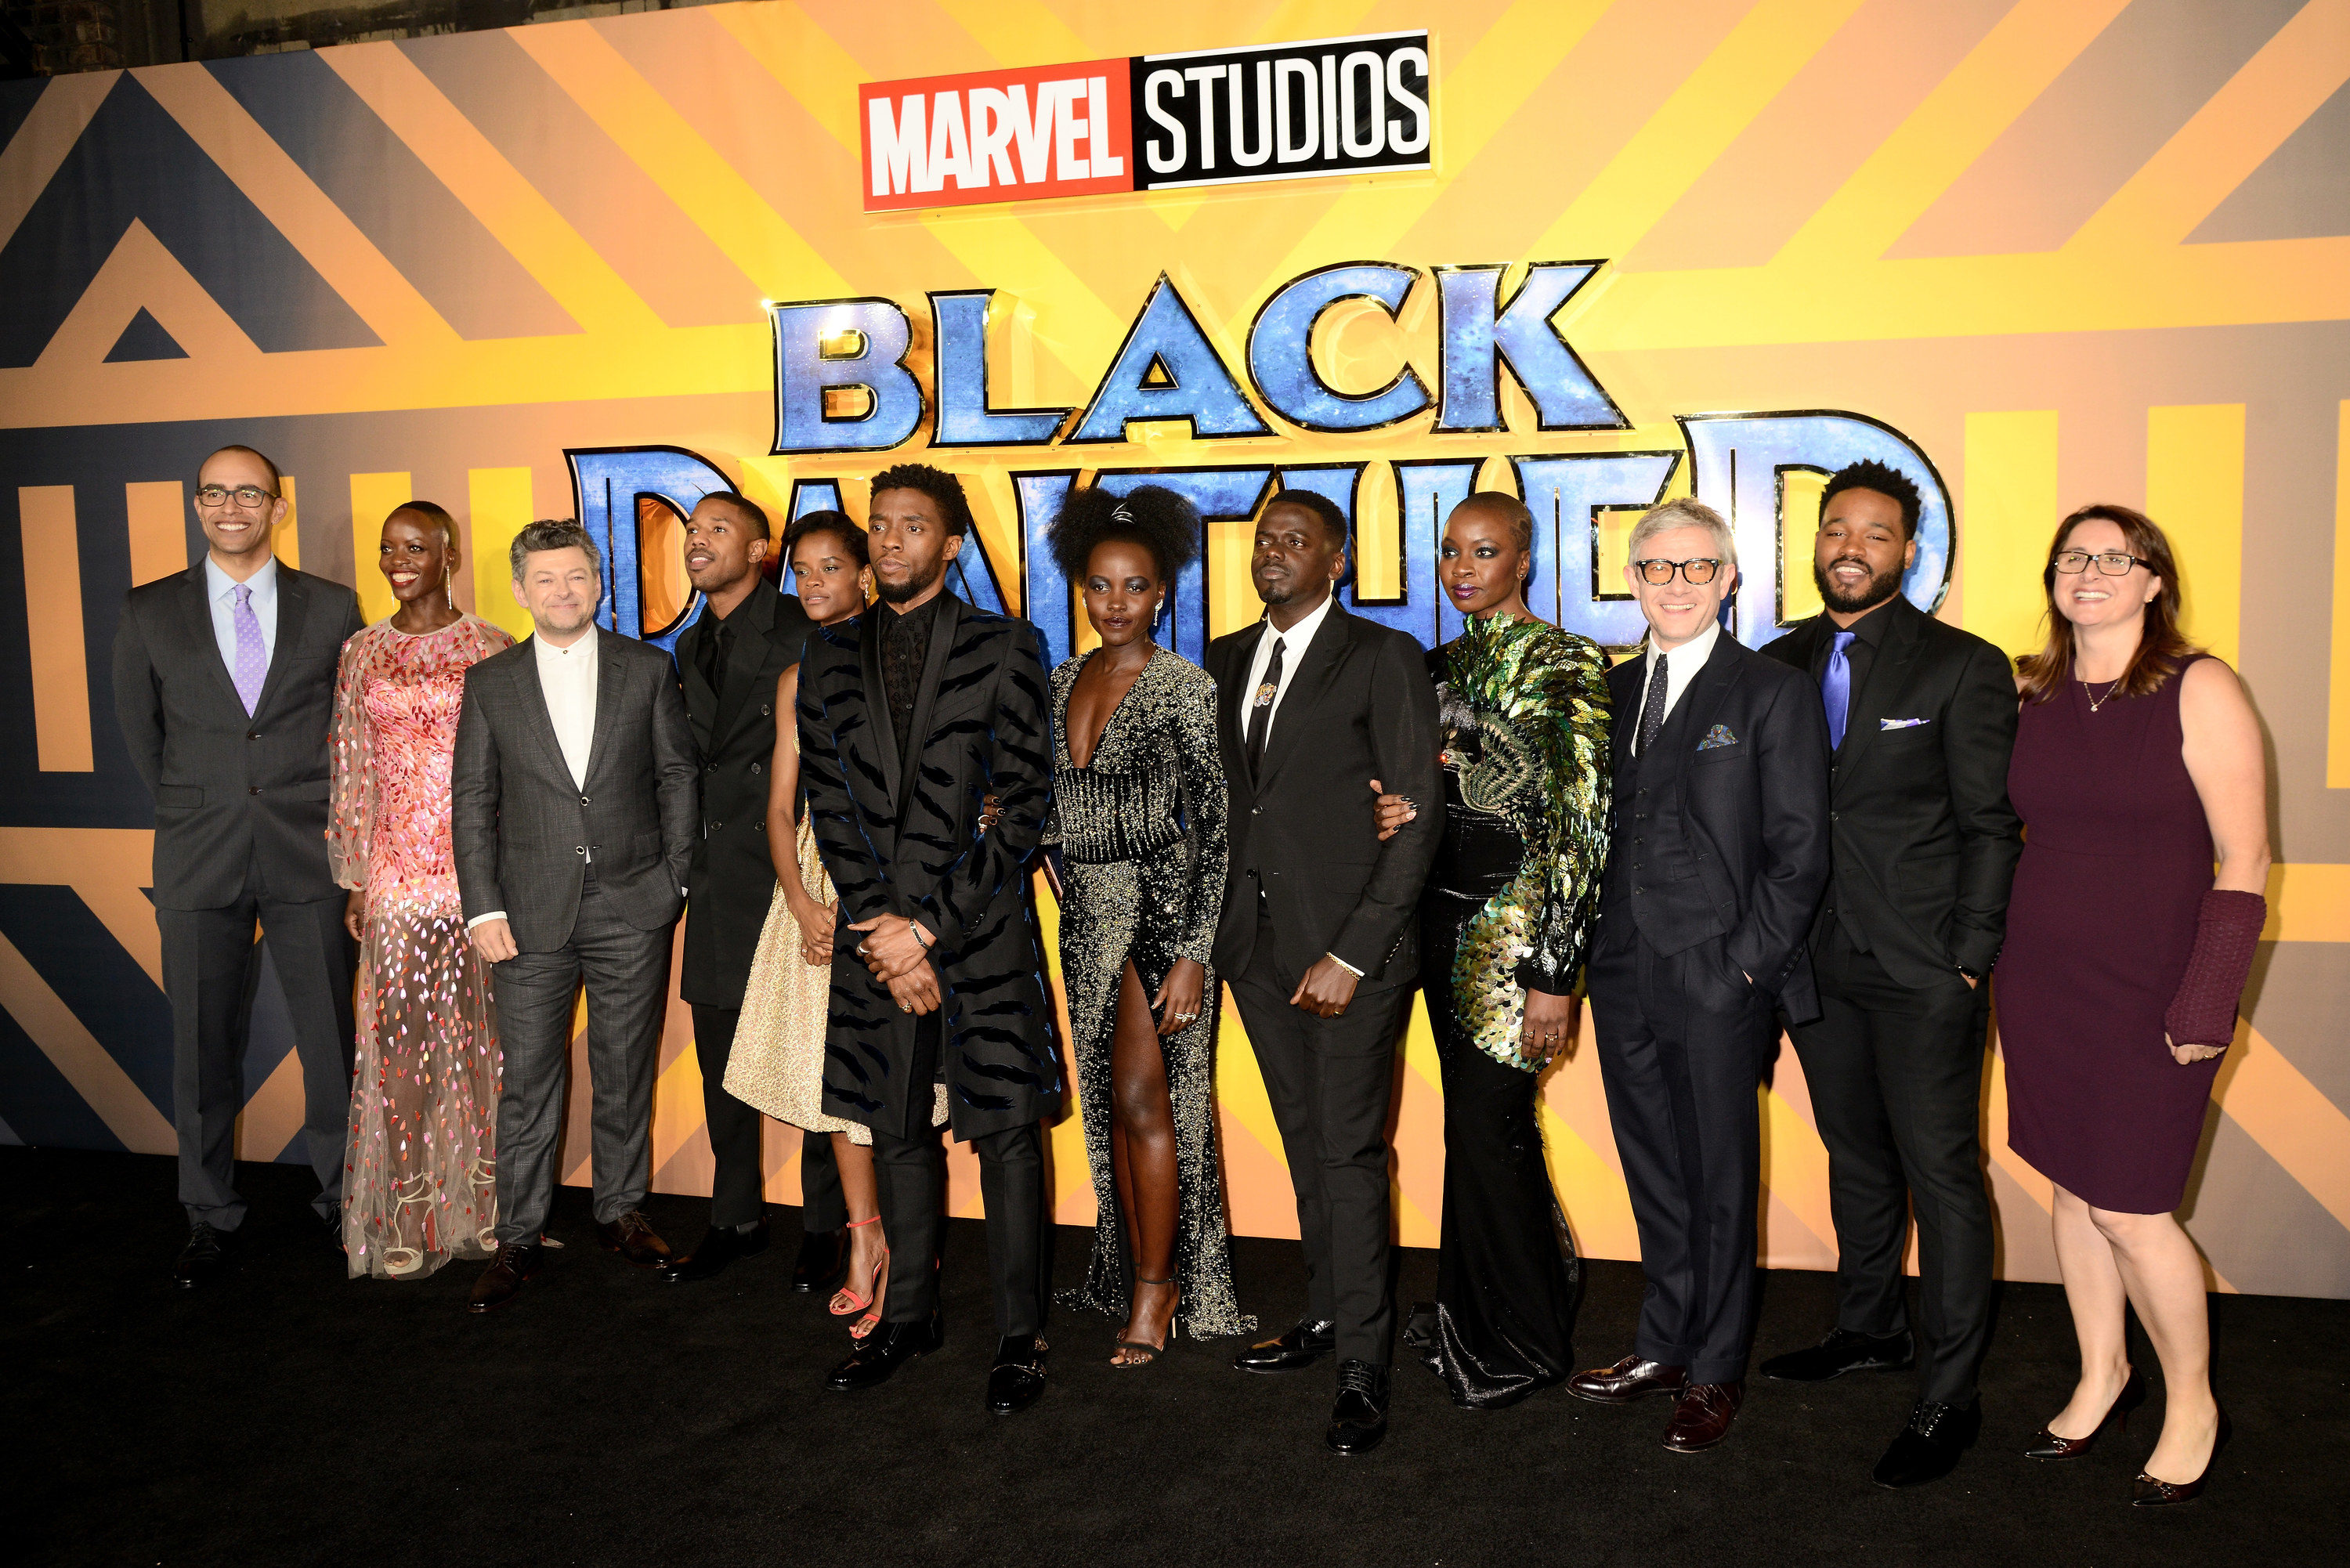 The cast of the first Black Panther pose for a group photo